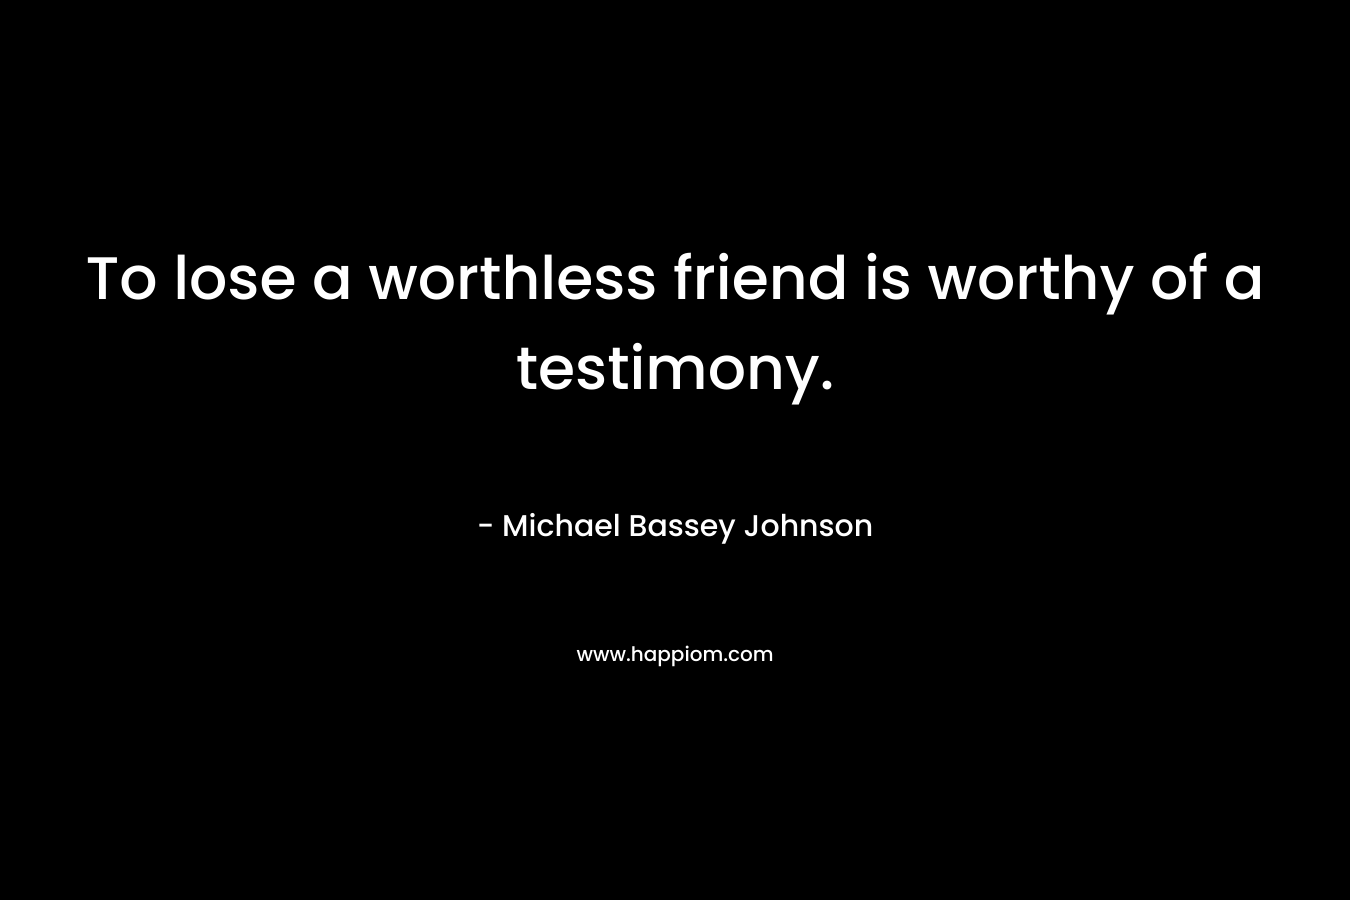 To lose a worthless friend is worthy of a testimony. – Michael Bassey Johnson